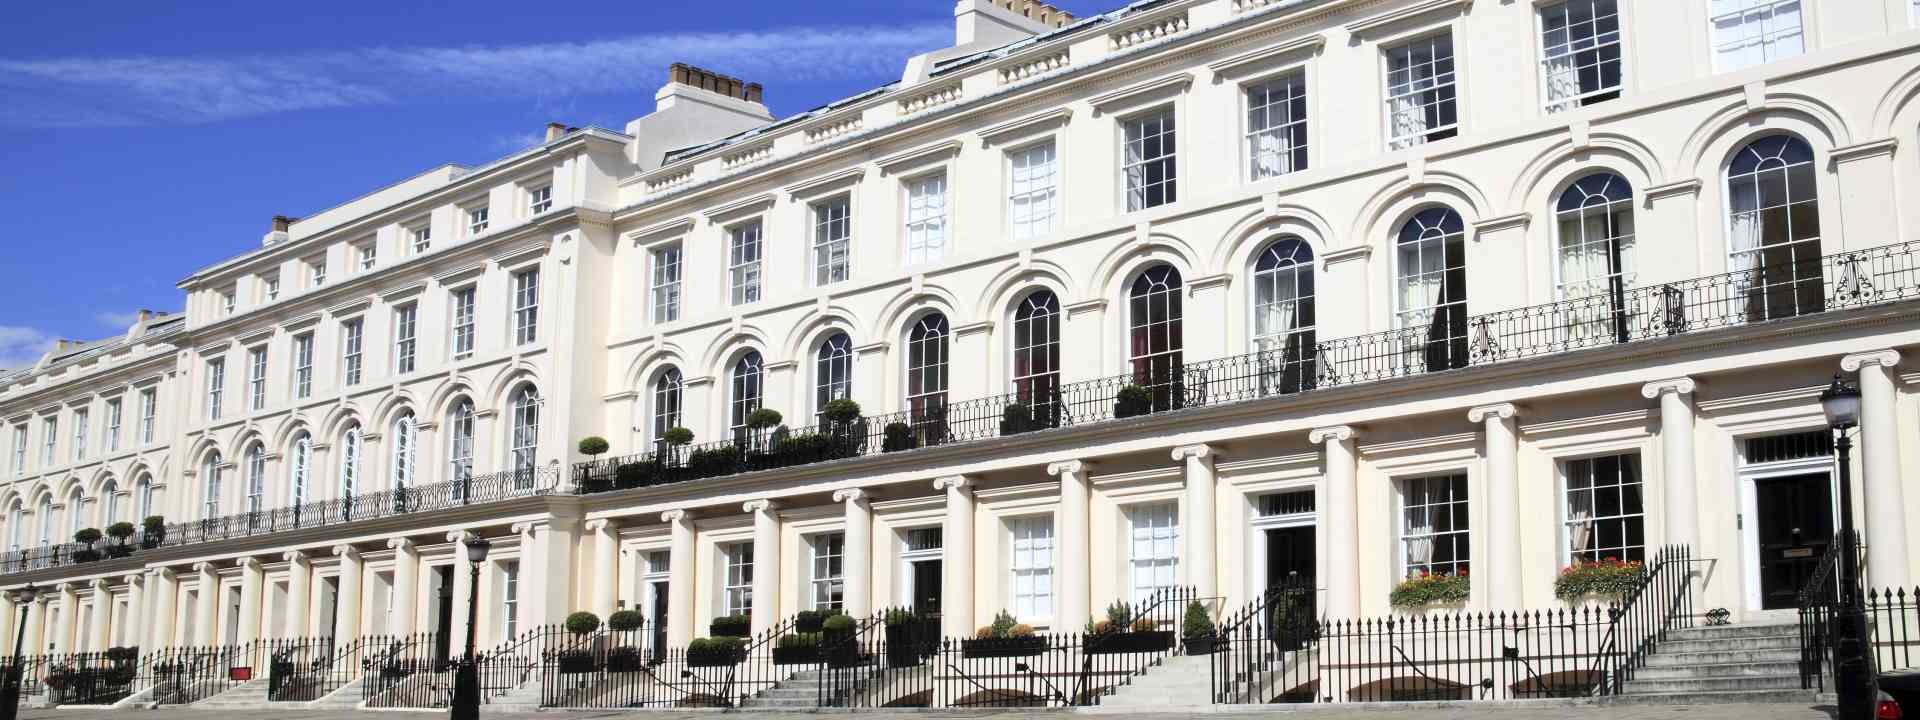 Luxurious-townhouse-apartment-Chelsea-and-Belgravia-London